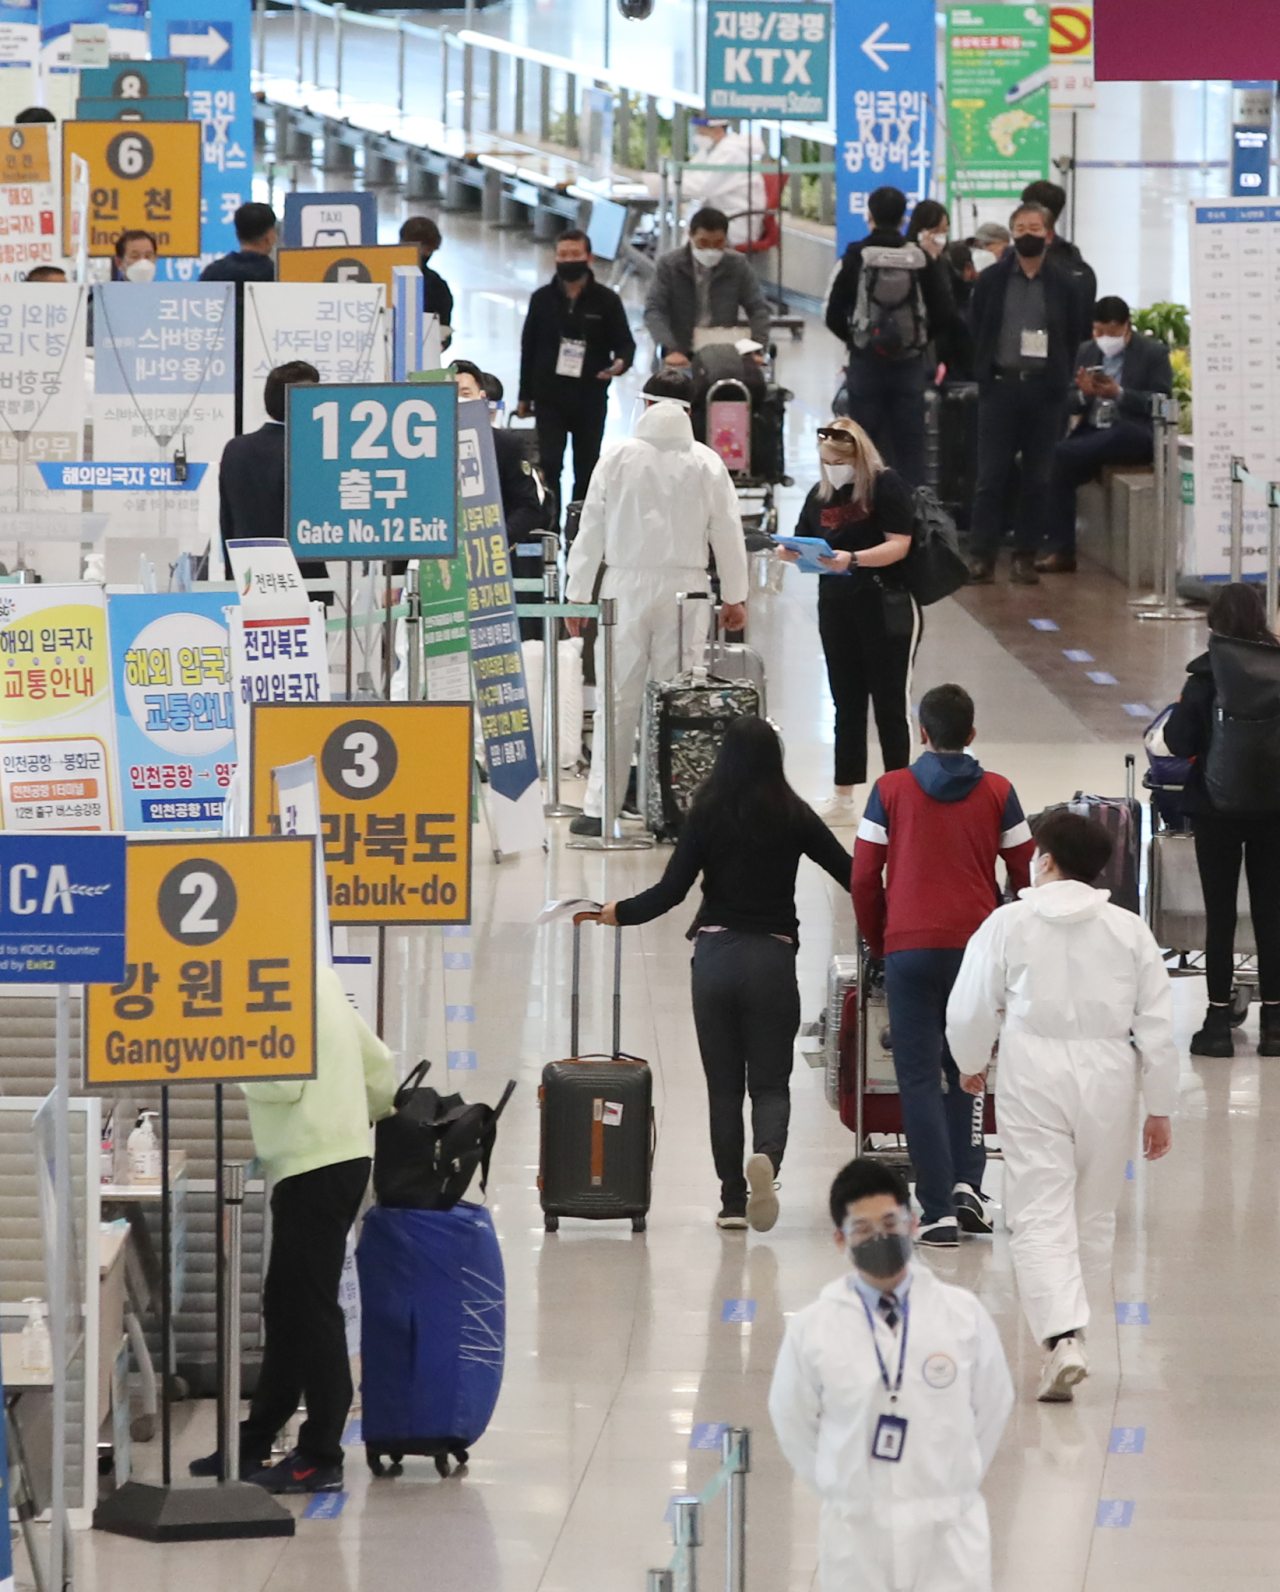 Arriving passengers are seen at Incheon airport, west of Seoul, amid the coronavirus pandemic in the file photo taken April 19, 2021. (Yonhap)